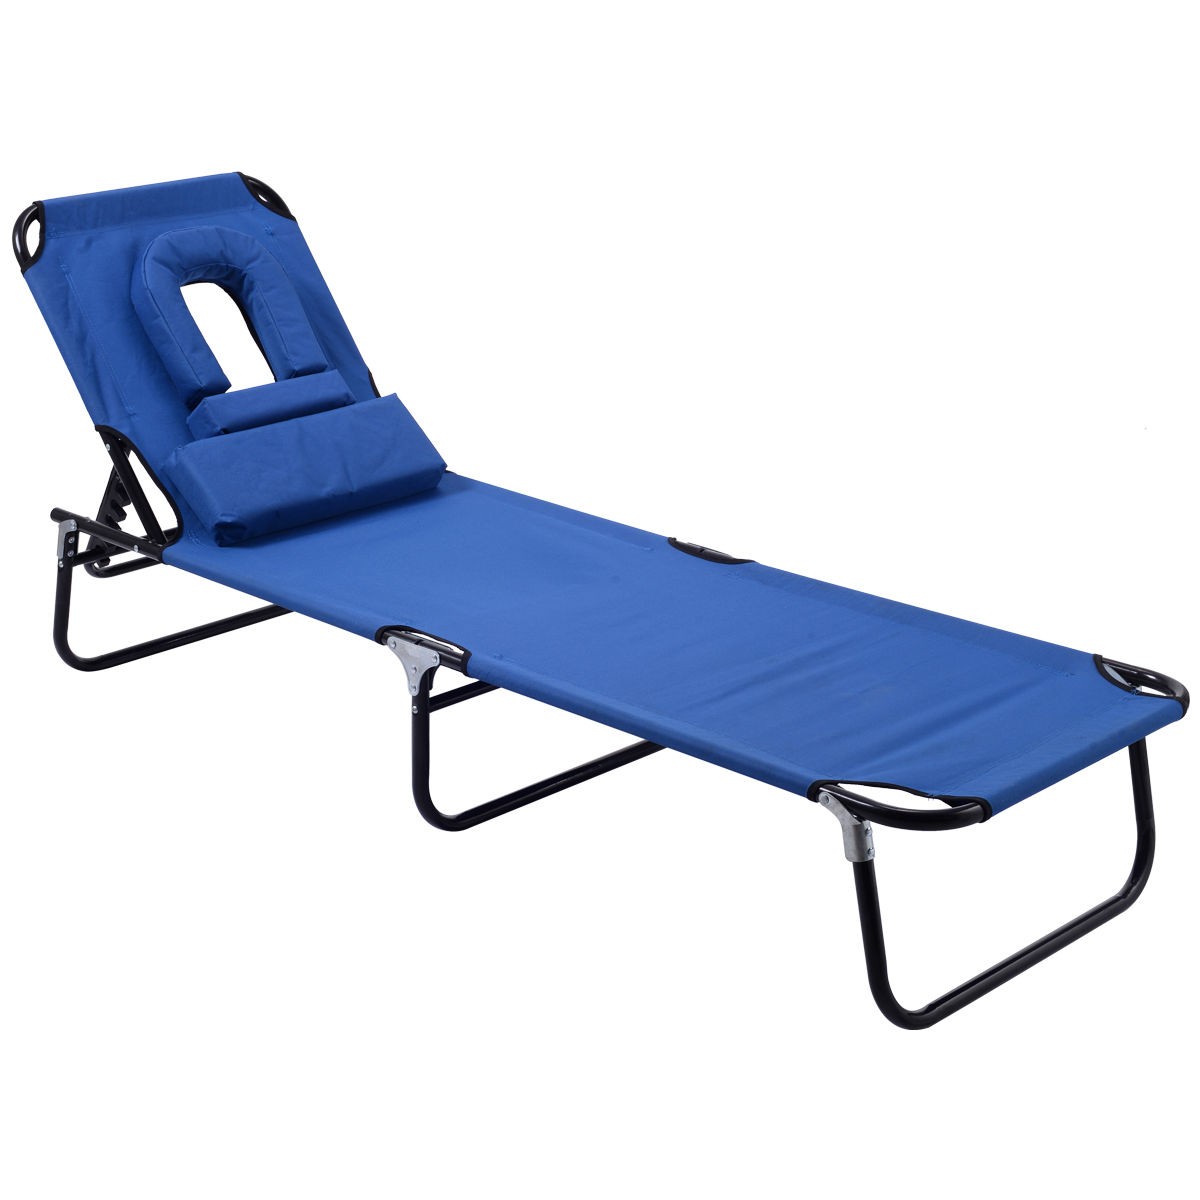 outdoor lounge bed chair photo - 1